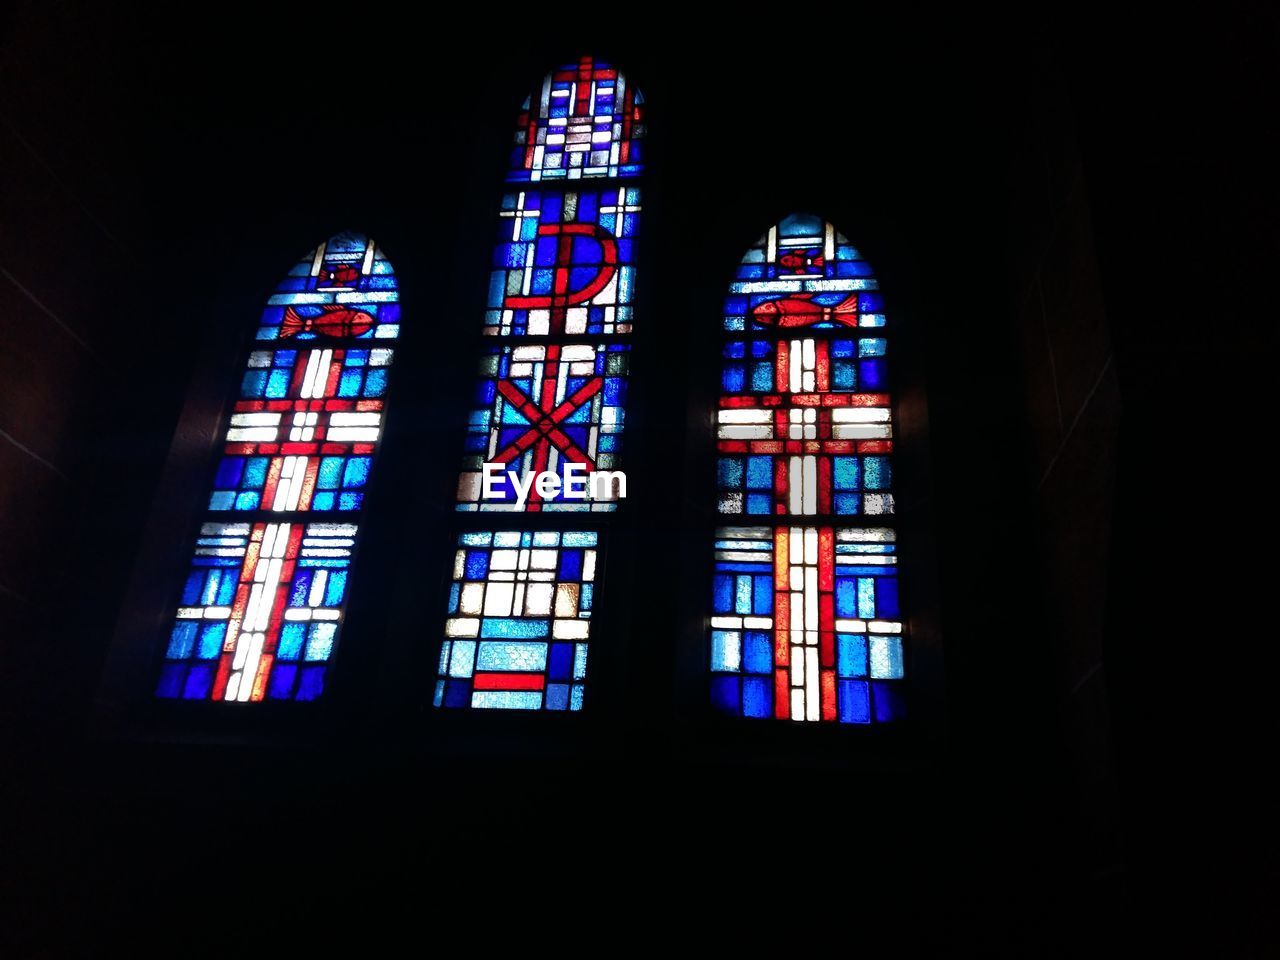 Low angle view of stained glass windows in church